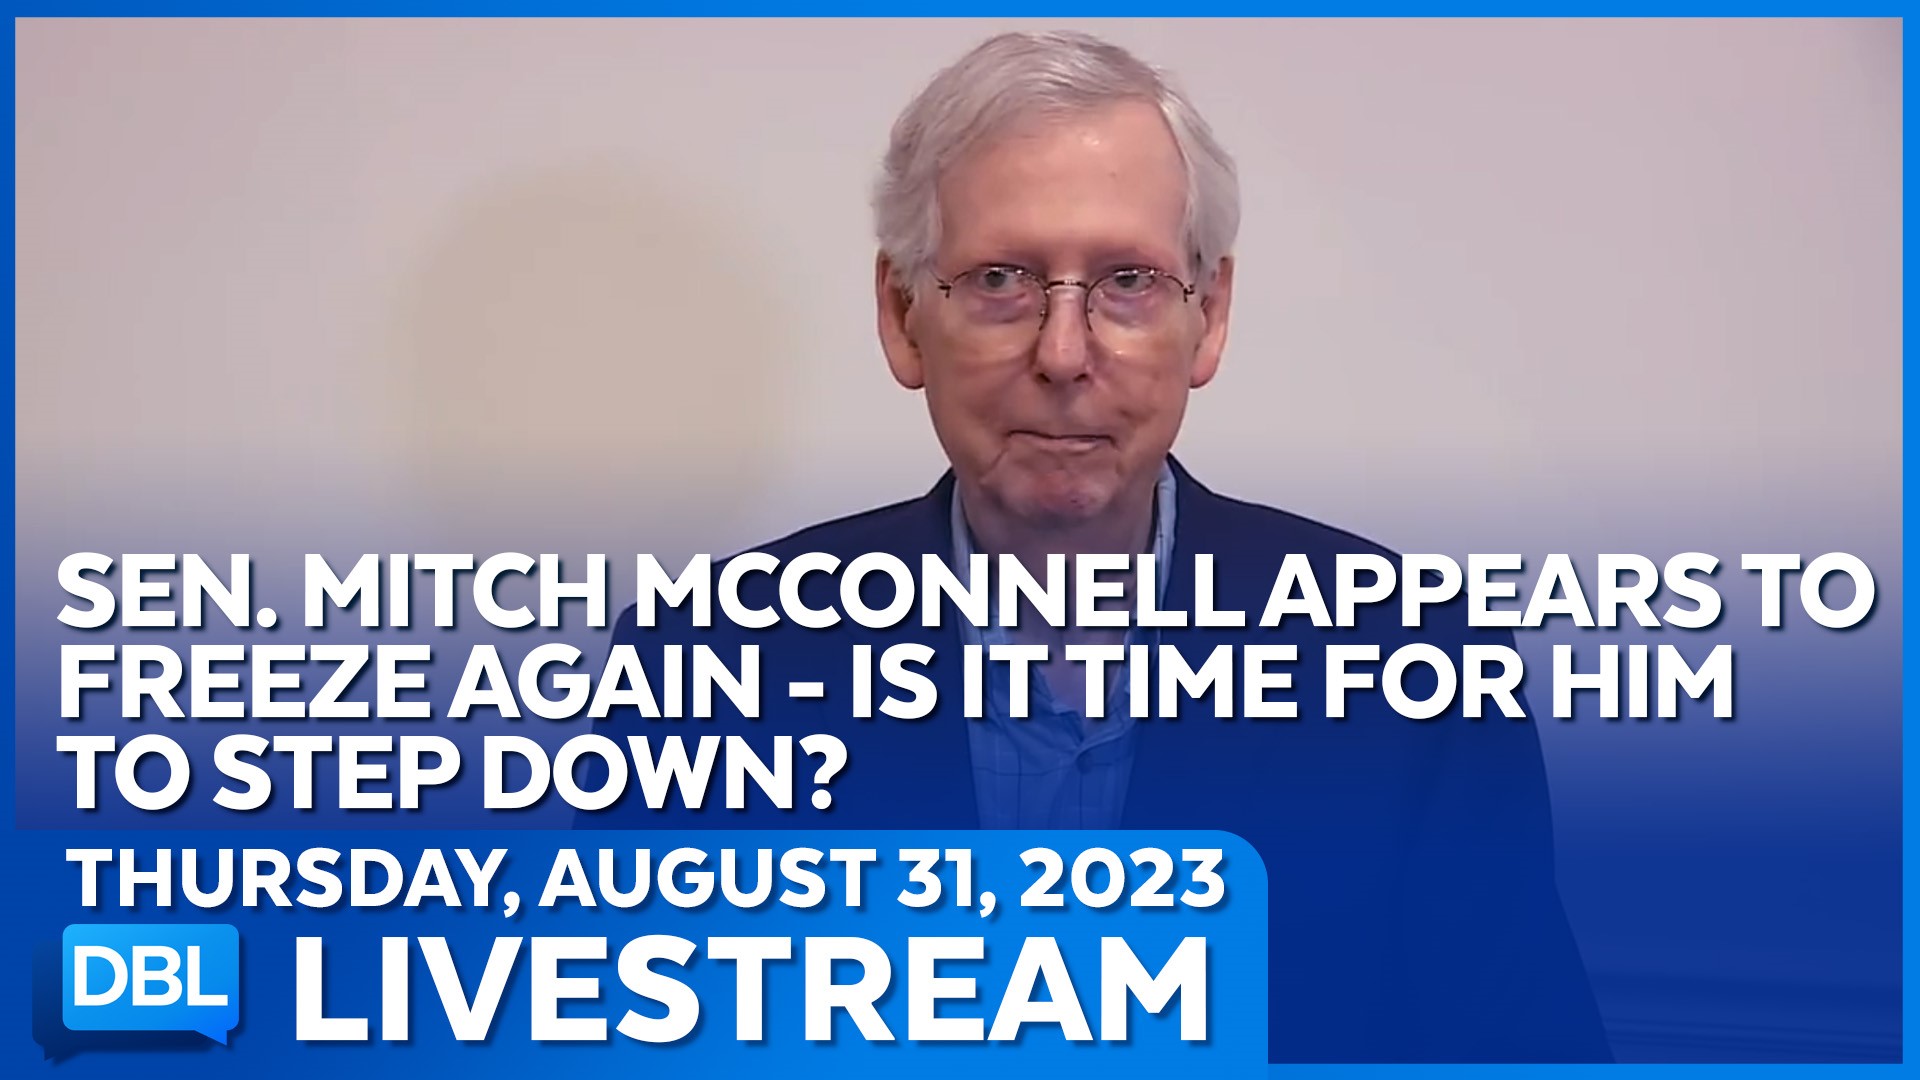 Mitch McConnell Raises Questions About Term & Age Limits With Recent Freeze Up